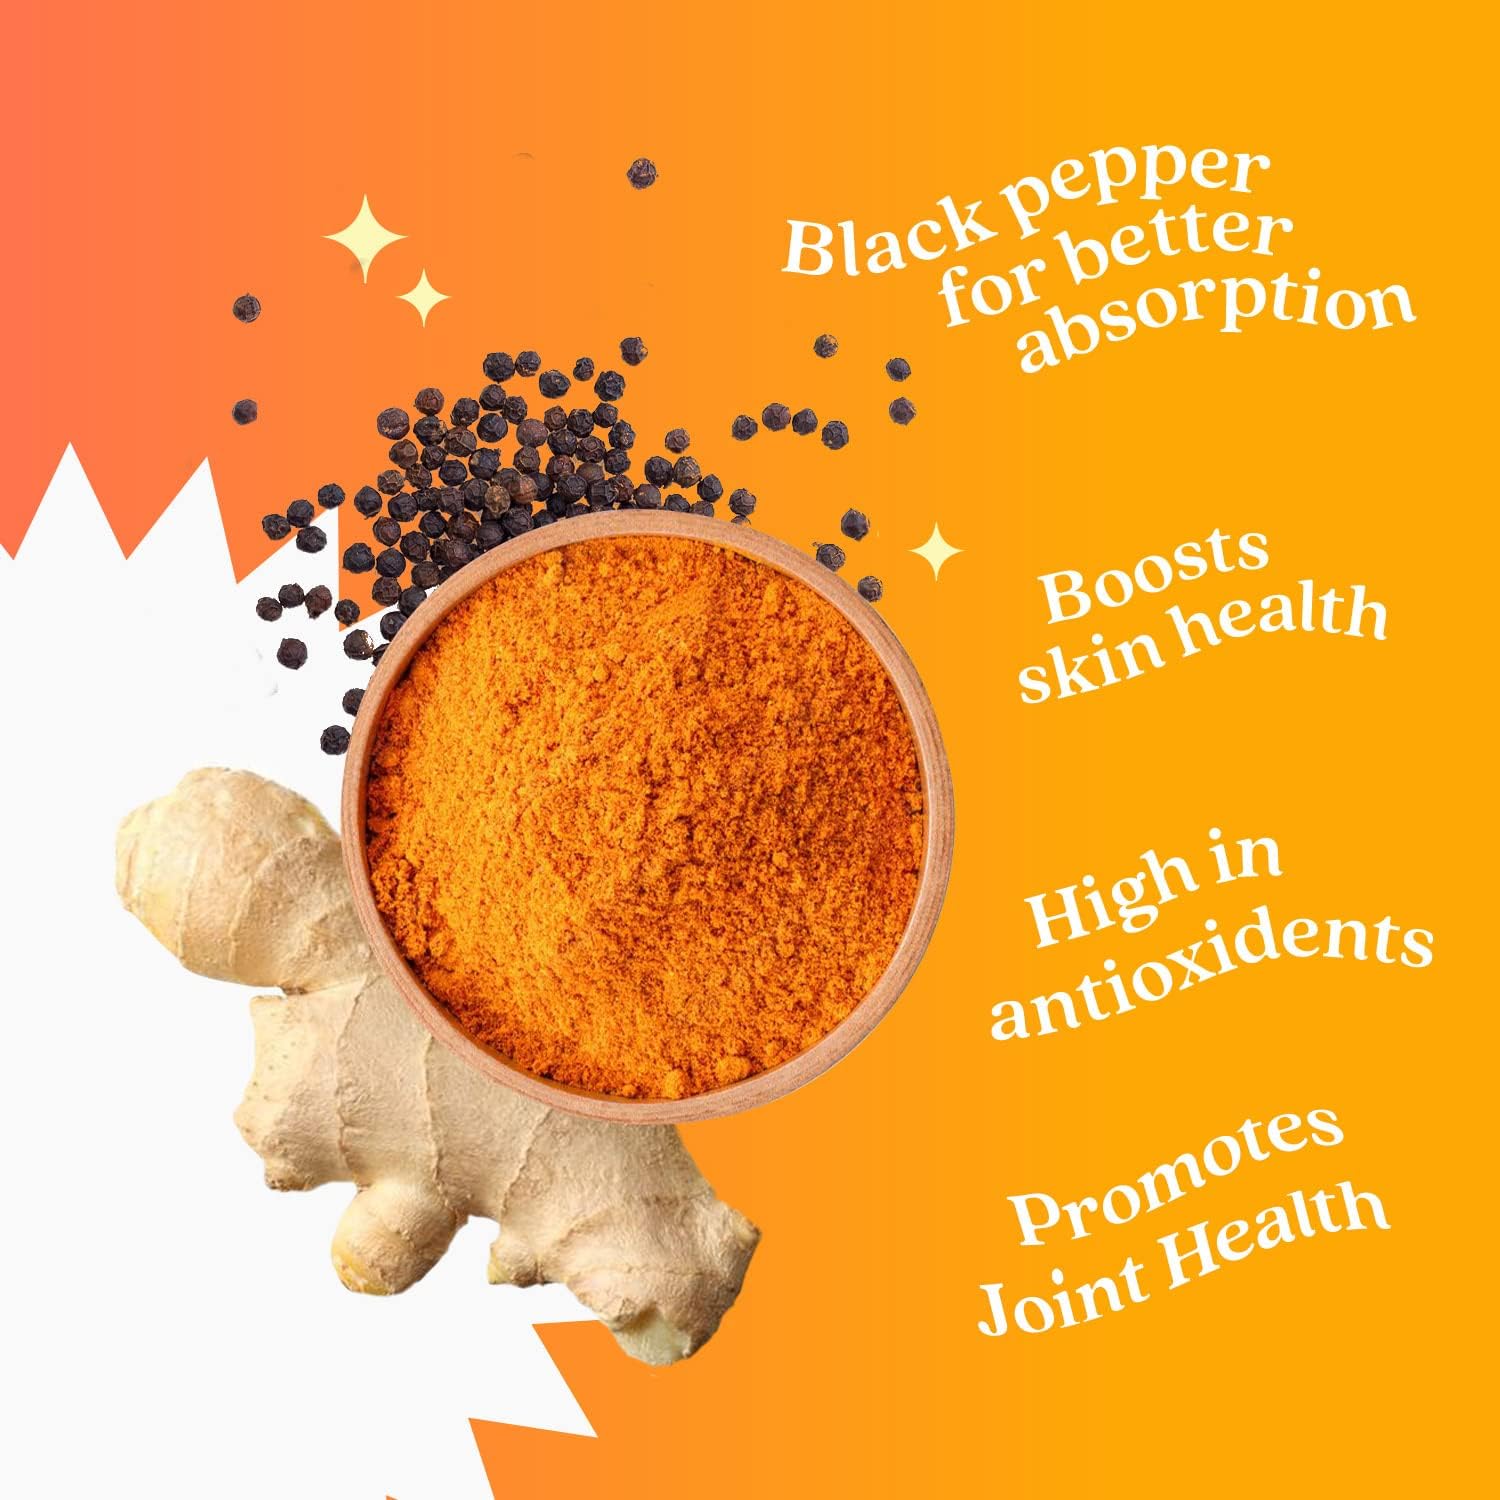 BeLive Turmeric Curcumin with Black Pepper & Ginger - 60 Gummies I Turmeric and Ginger Supplement for Immune Support, Healthy Skin, and Joint Health - Tropical Flavor - Premium Turmeric from Concordia Style Boutique - Just $25! Shop now at Concordia Style Boutique